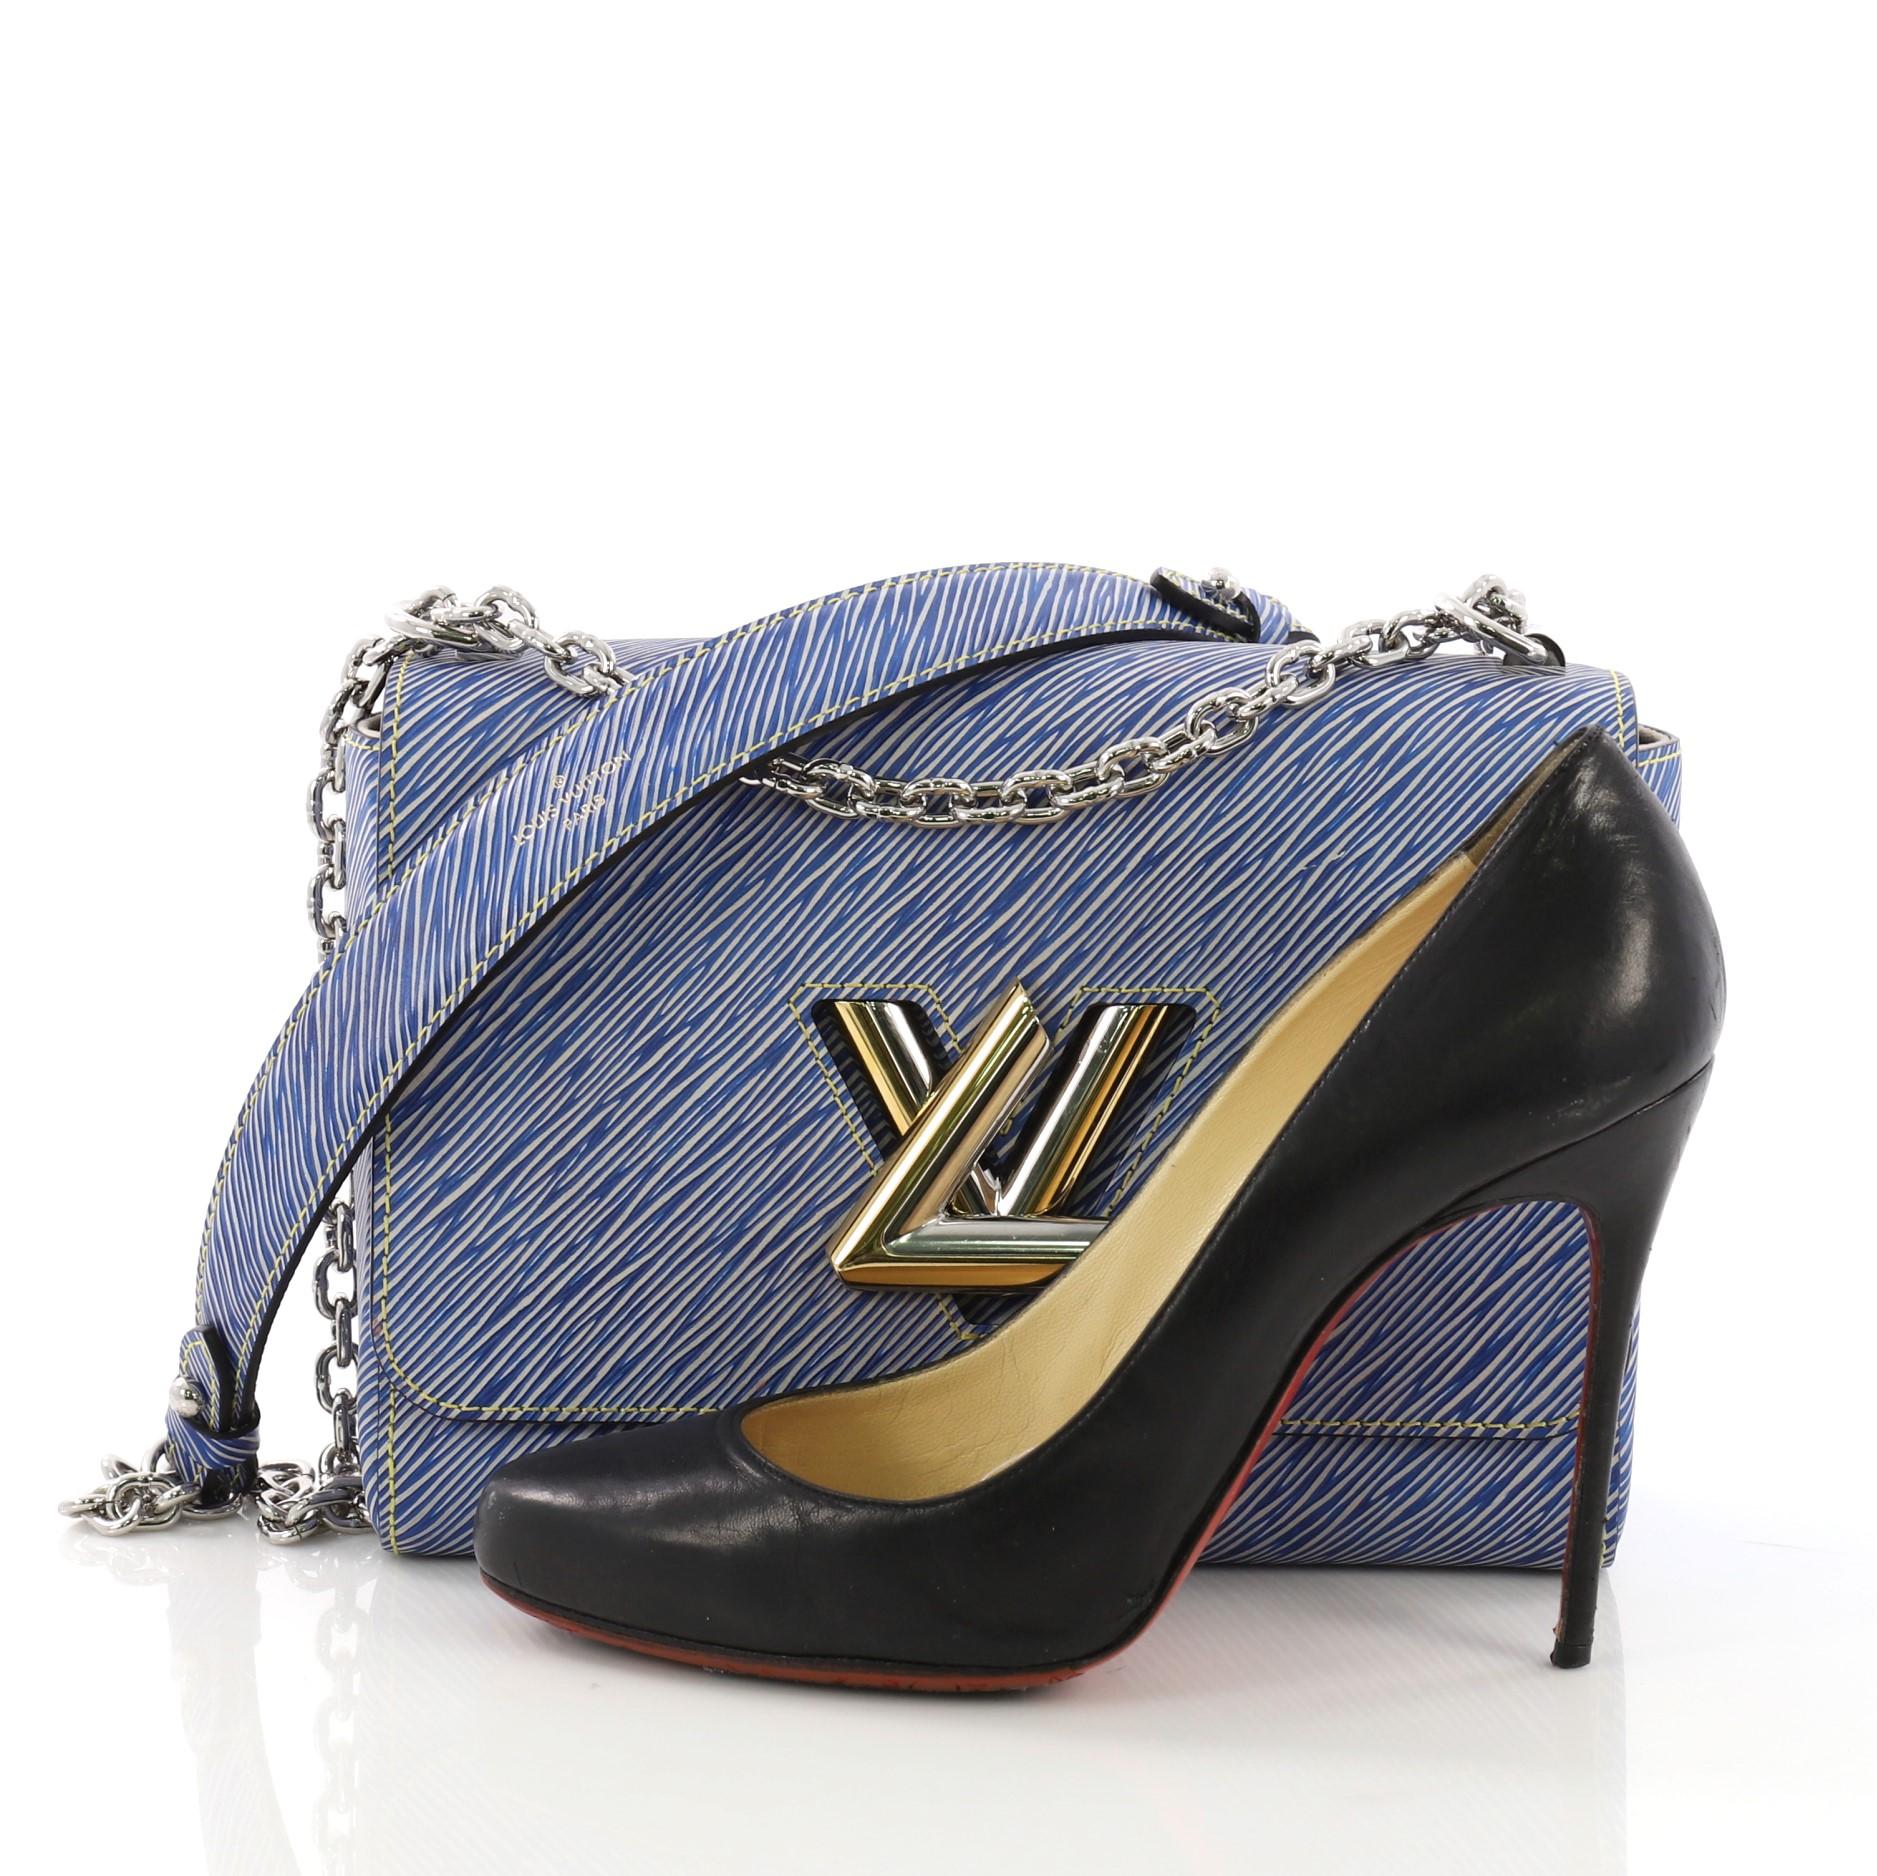 This Louis Vuitton Twist Handbag Epi Leather MM, crafted from blue epi leather, features a chain link strap with leather pad, frontal flap, and silver and gold-tone hardware. Its LV twist lock closure opens to a light grey microfiber interior with